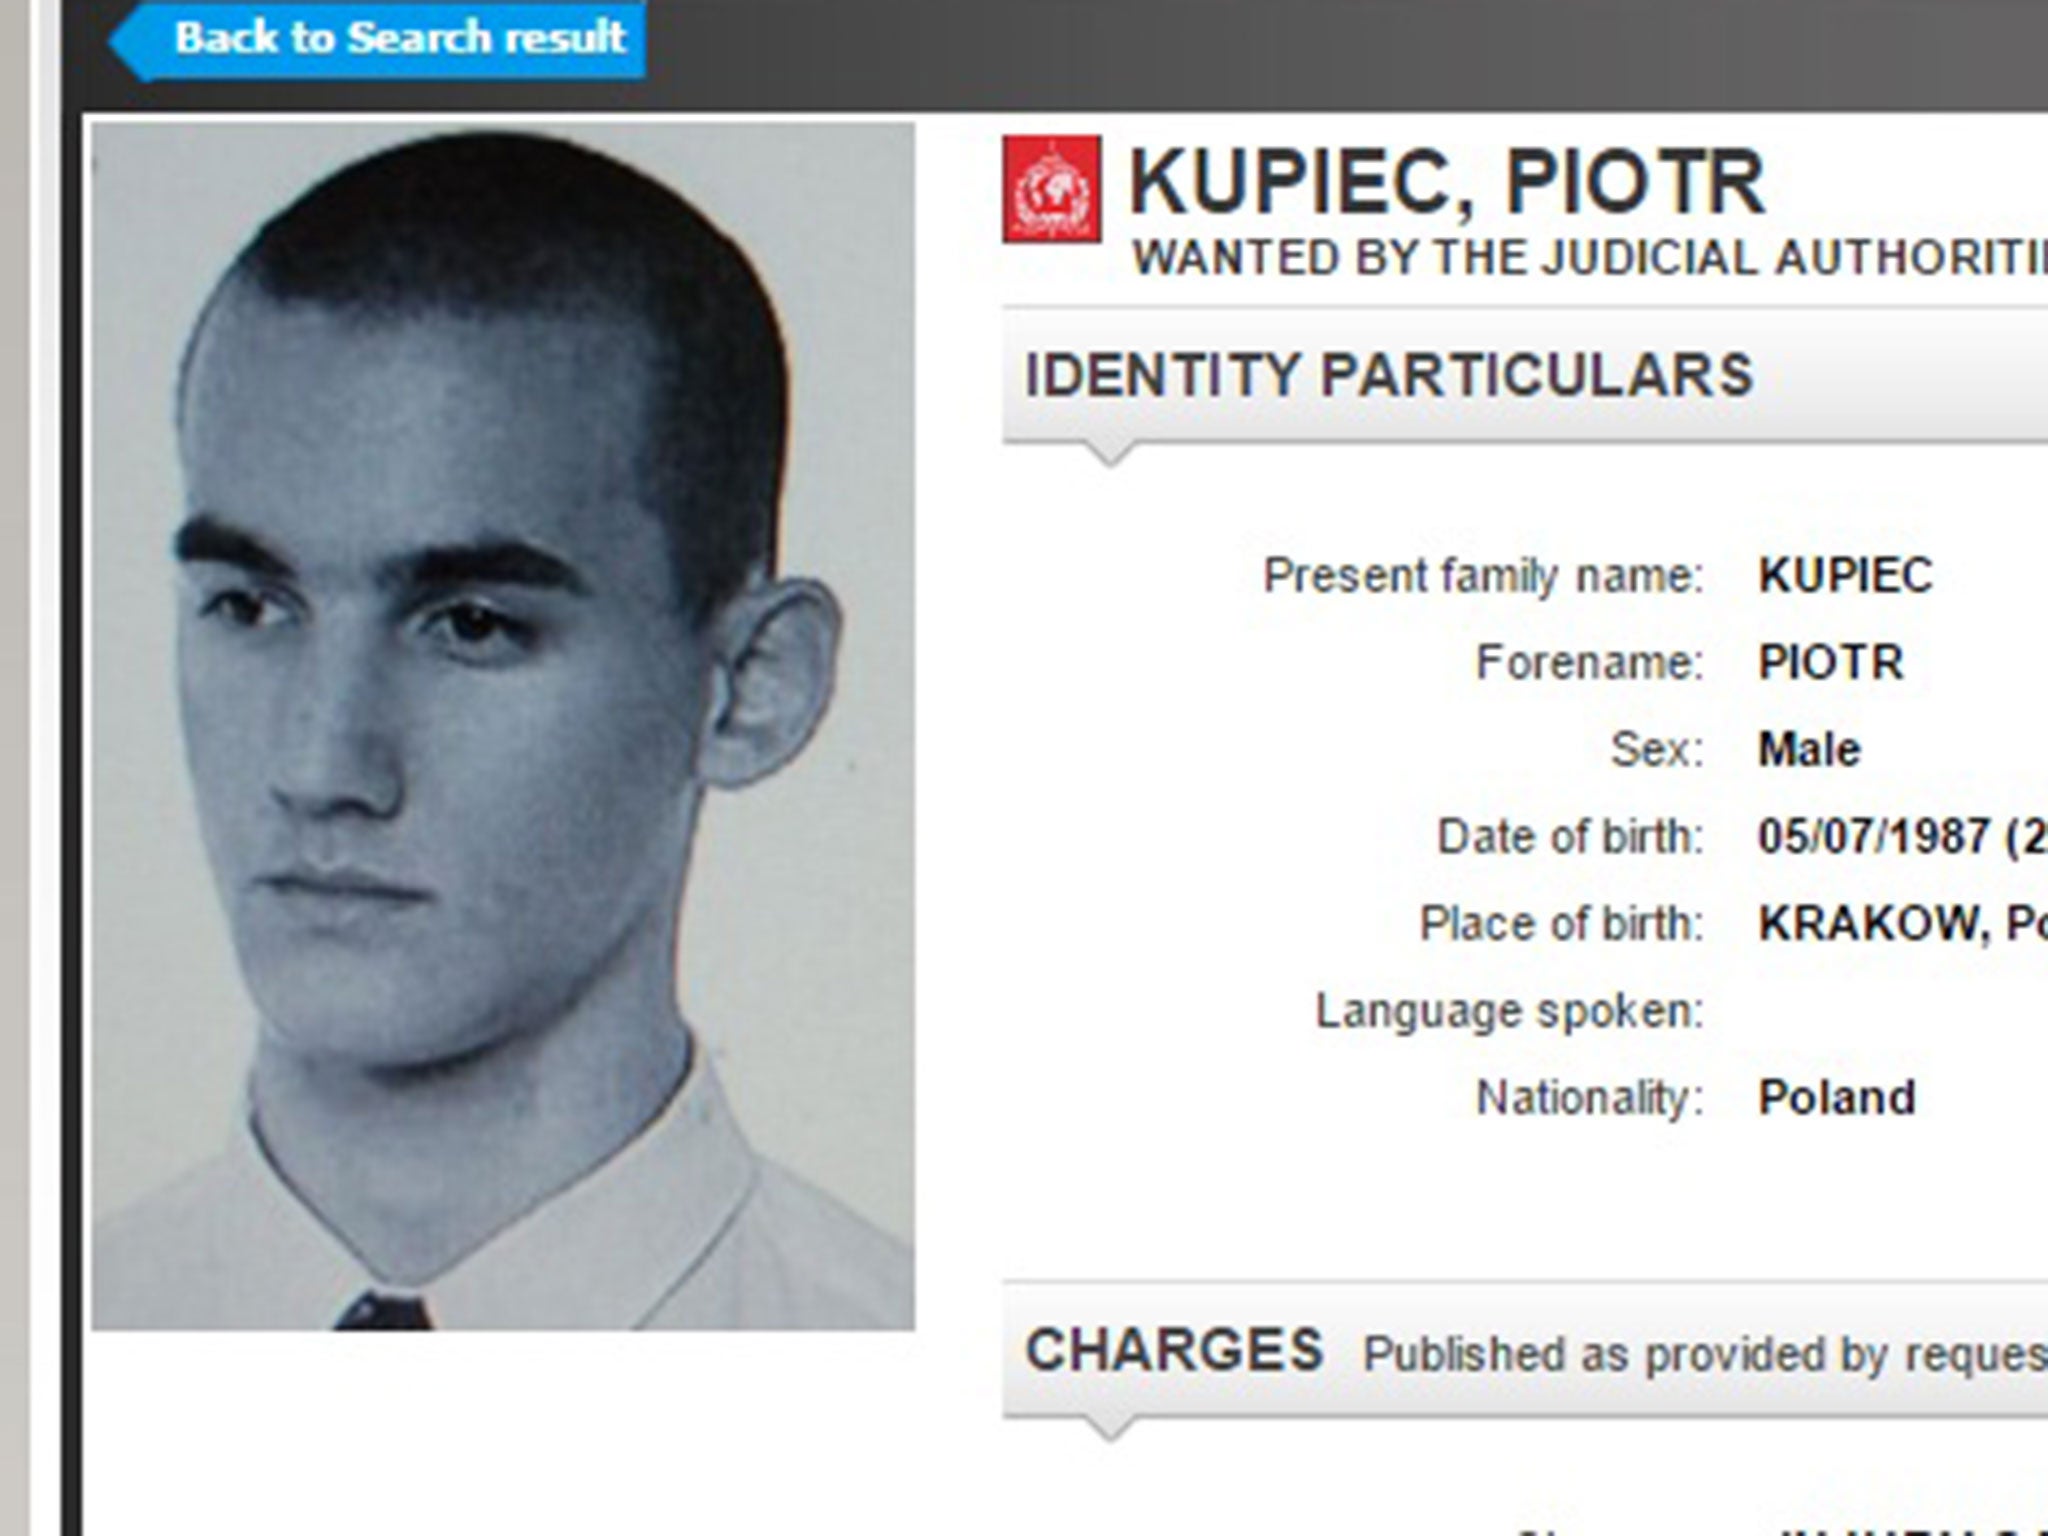 Piotr Kupiec was subject to an arrest warrant issued by Interpol